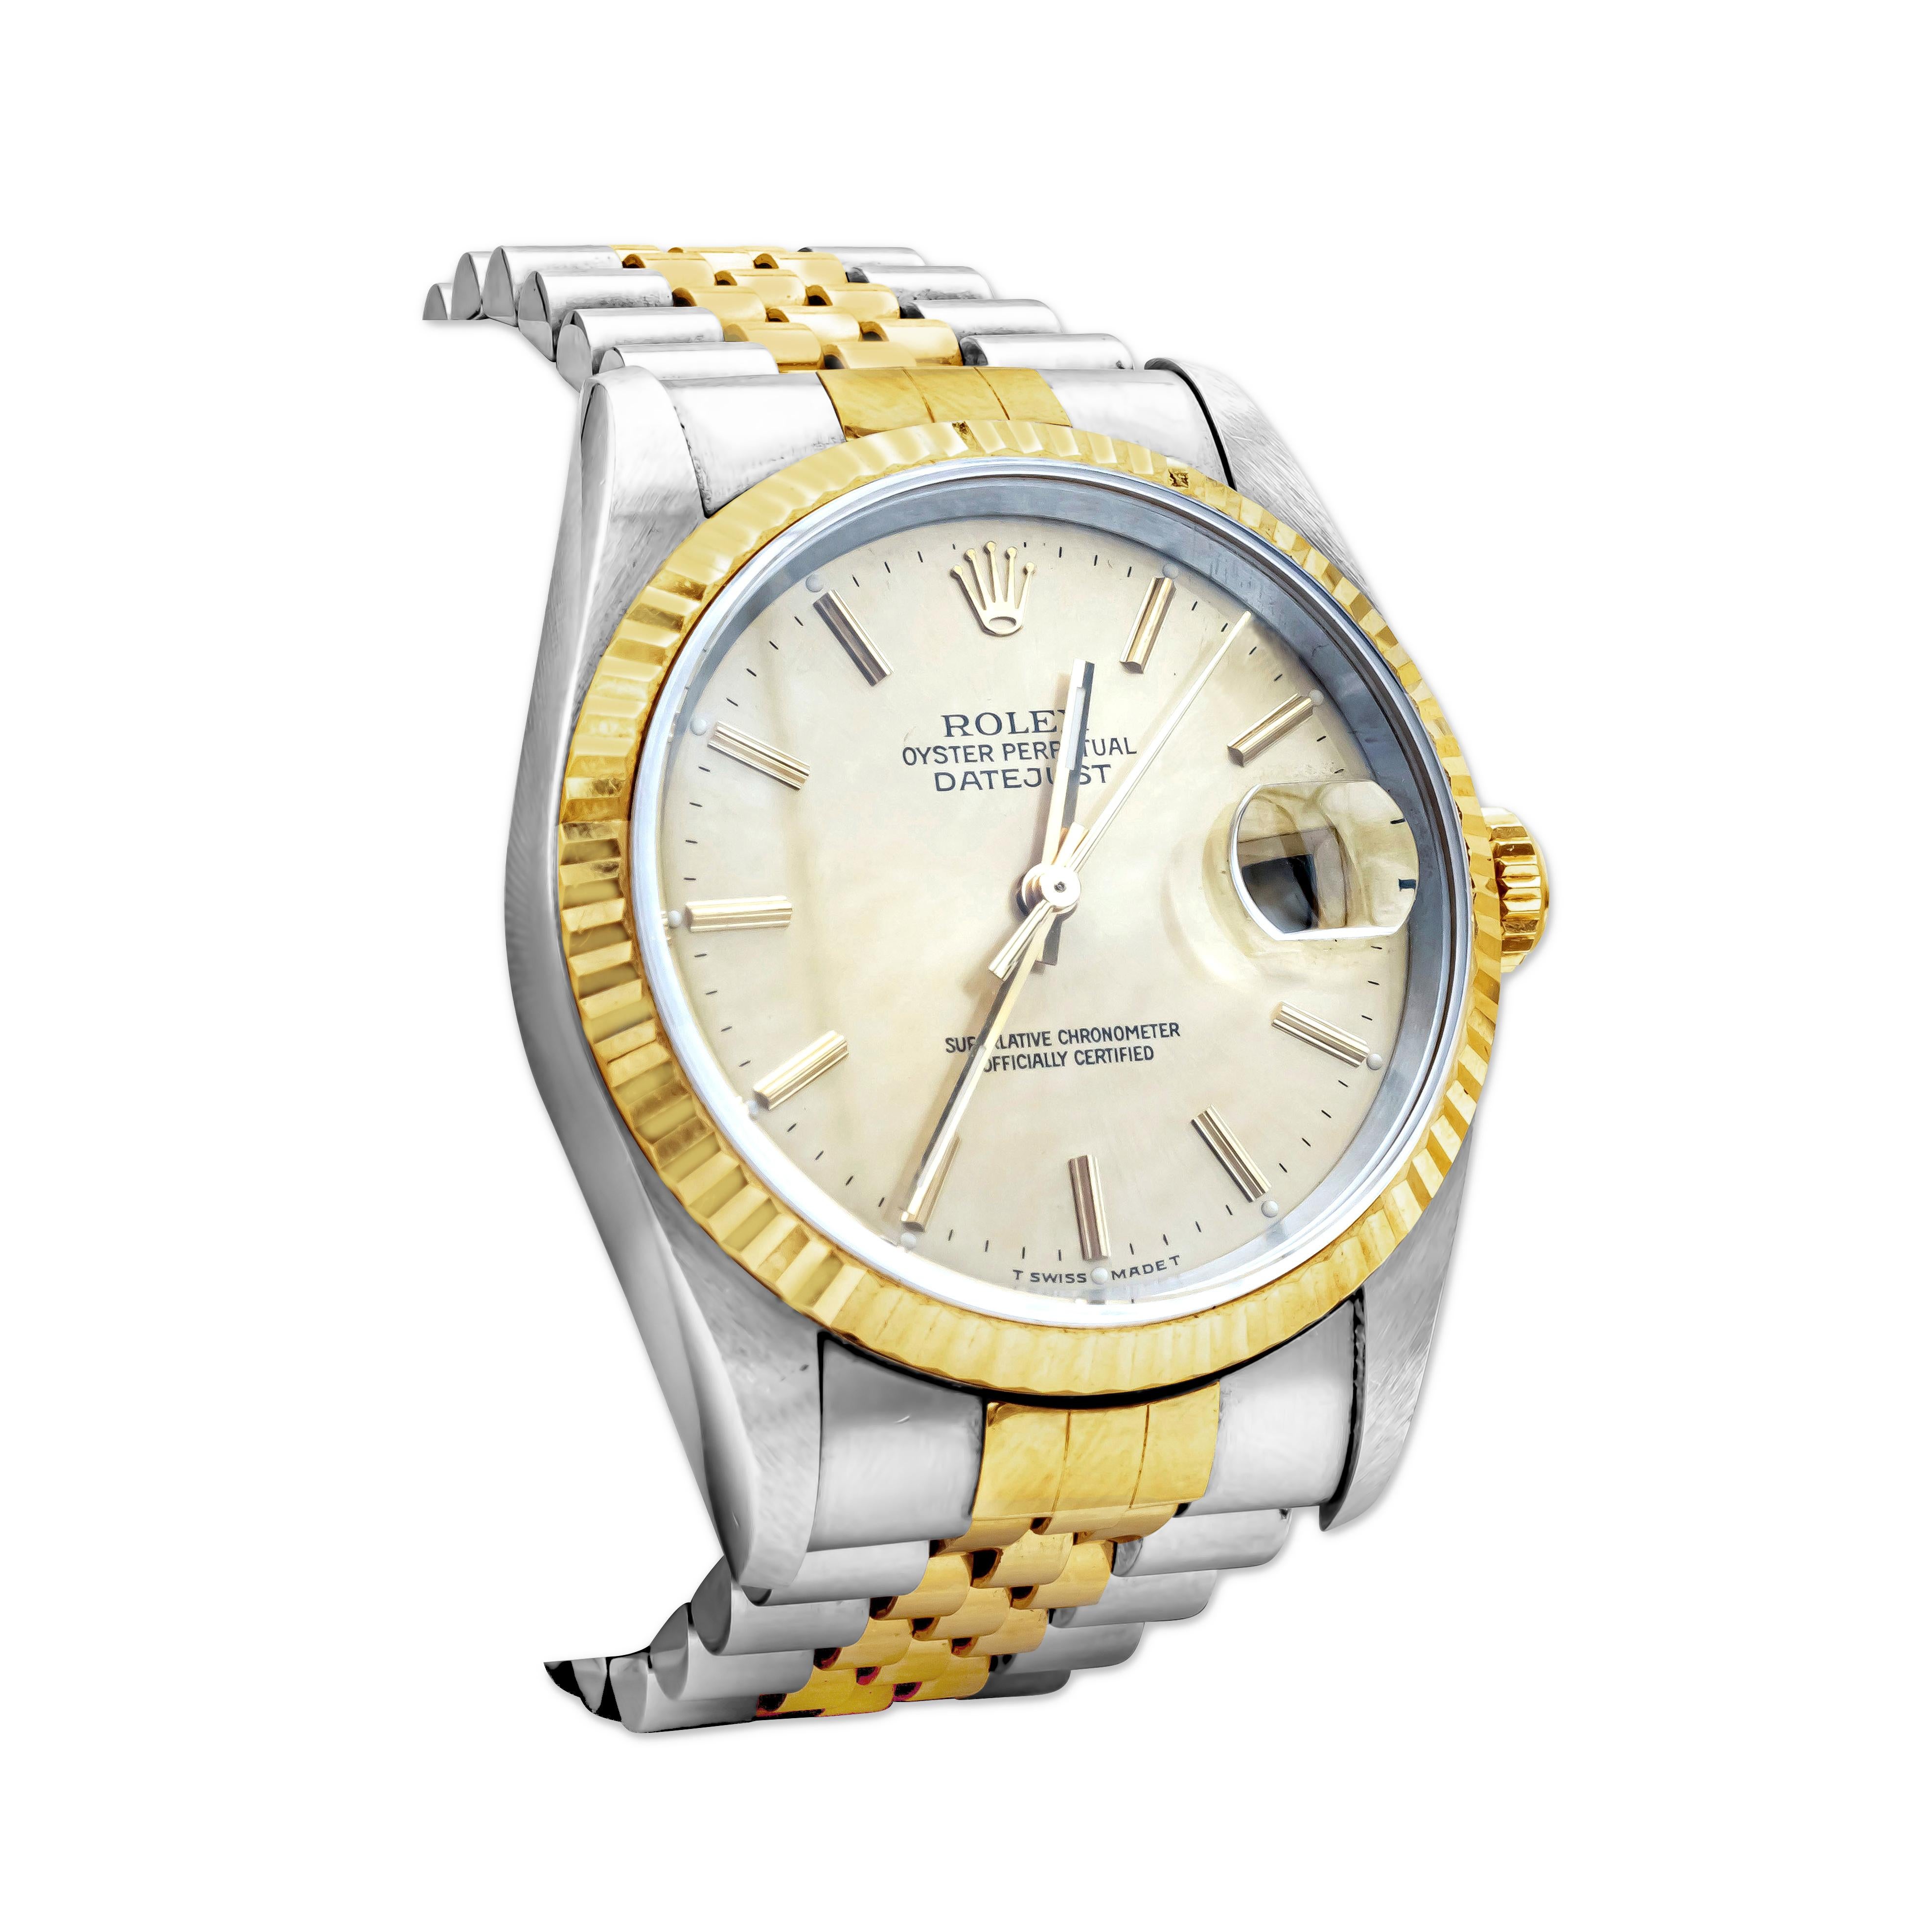 Pre-Owned Rolex Datejust (16233) self - winding automatic watch, features a 36mm stainless steel case with an 18k yellow gold fluted bezel, Rolex jubilee 18K Yellow Gold and Stainless Steel bracelet with deployment buckle. Champagne sticks dial.